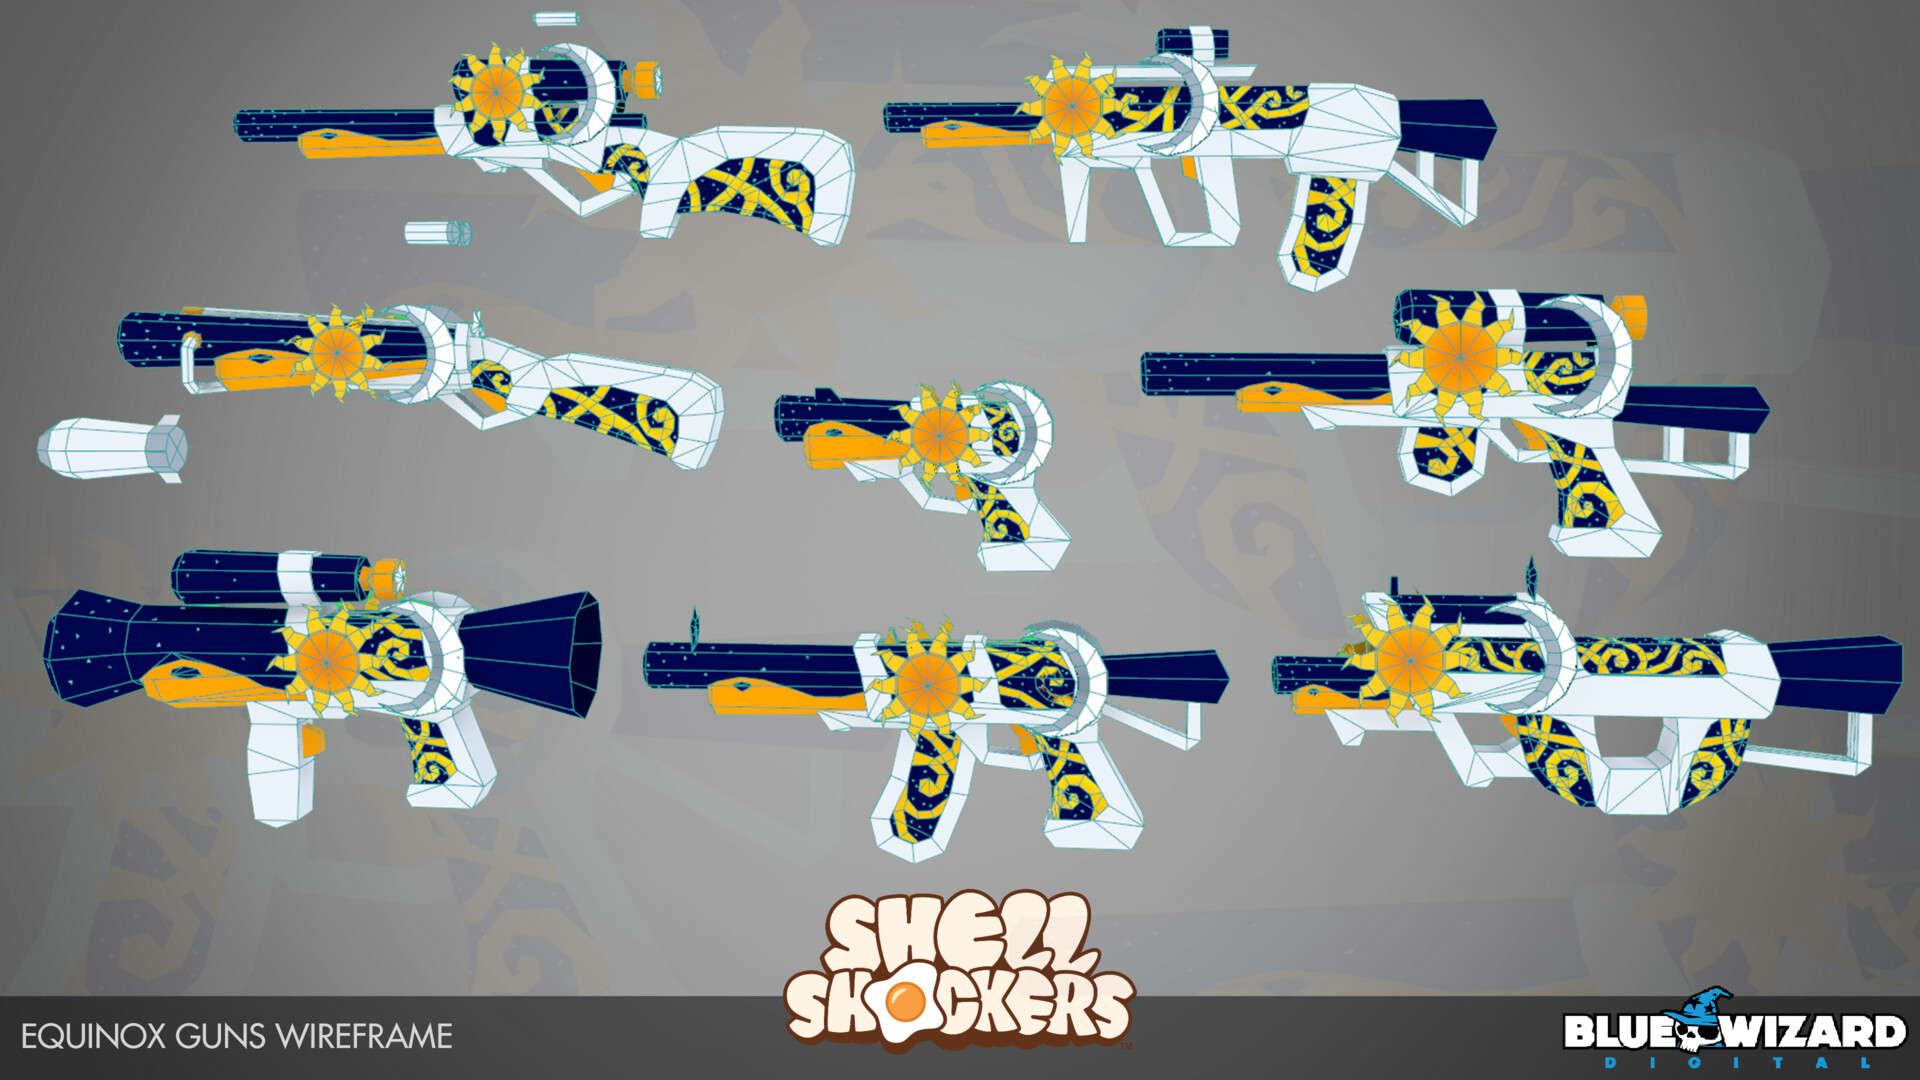 THE NEW WEAPON - Shell Shockers 